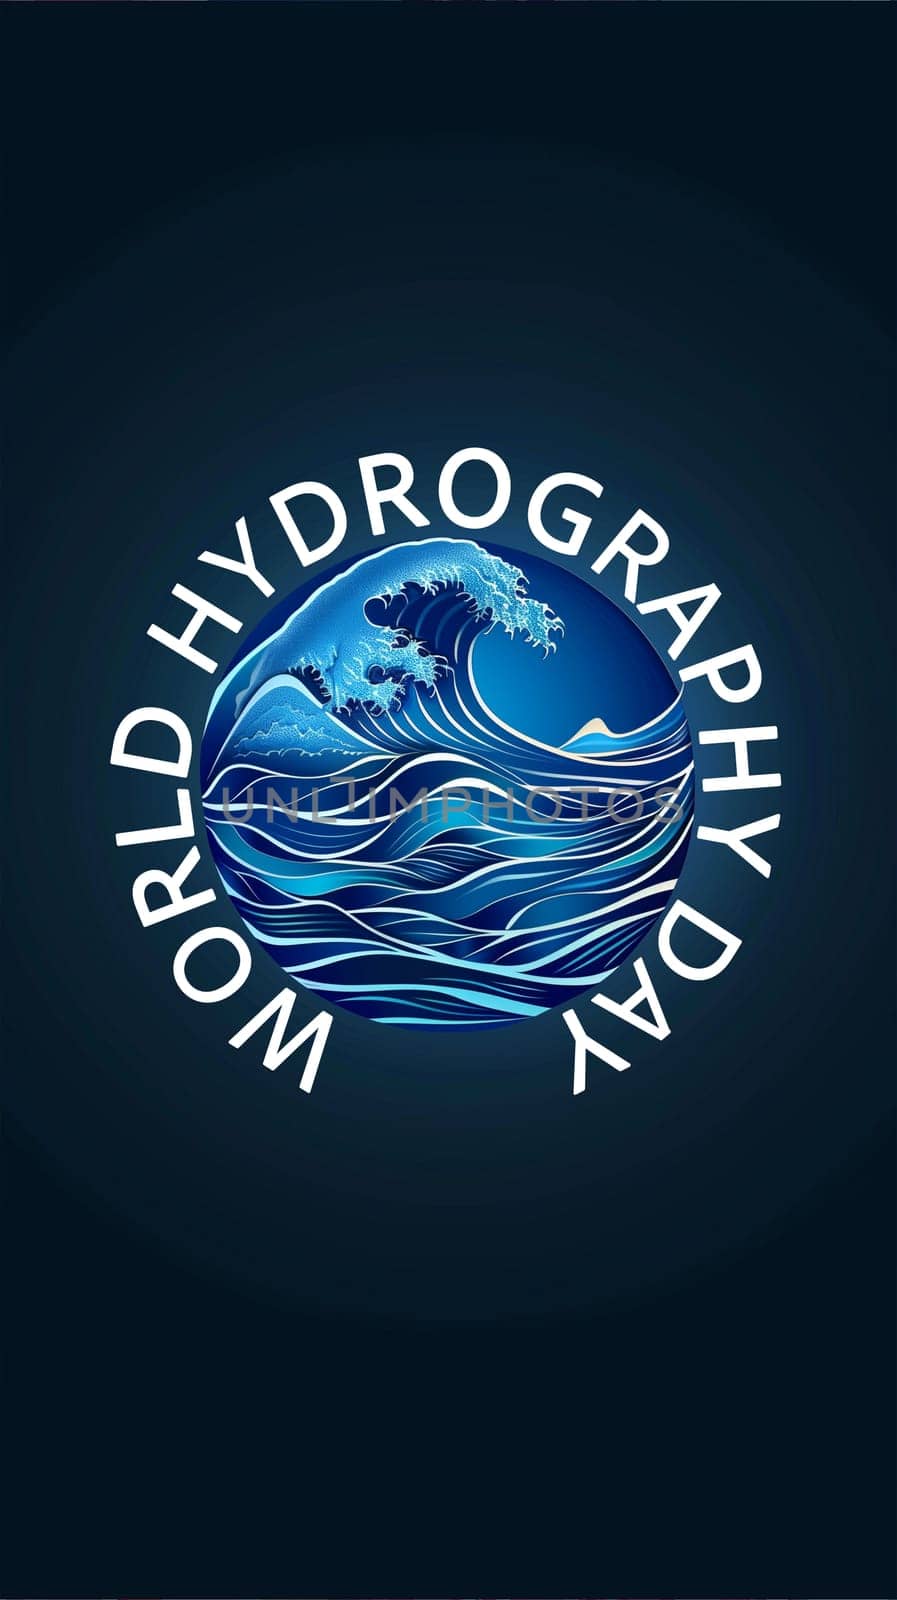 A stylized globe highlights the worlds oceans and seas to celebrate World Hydrography Day, emphasizing the importance of marine geography.